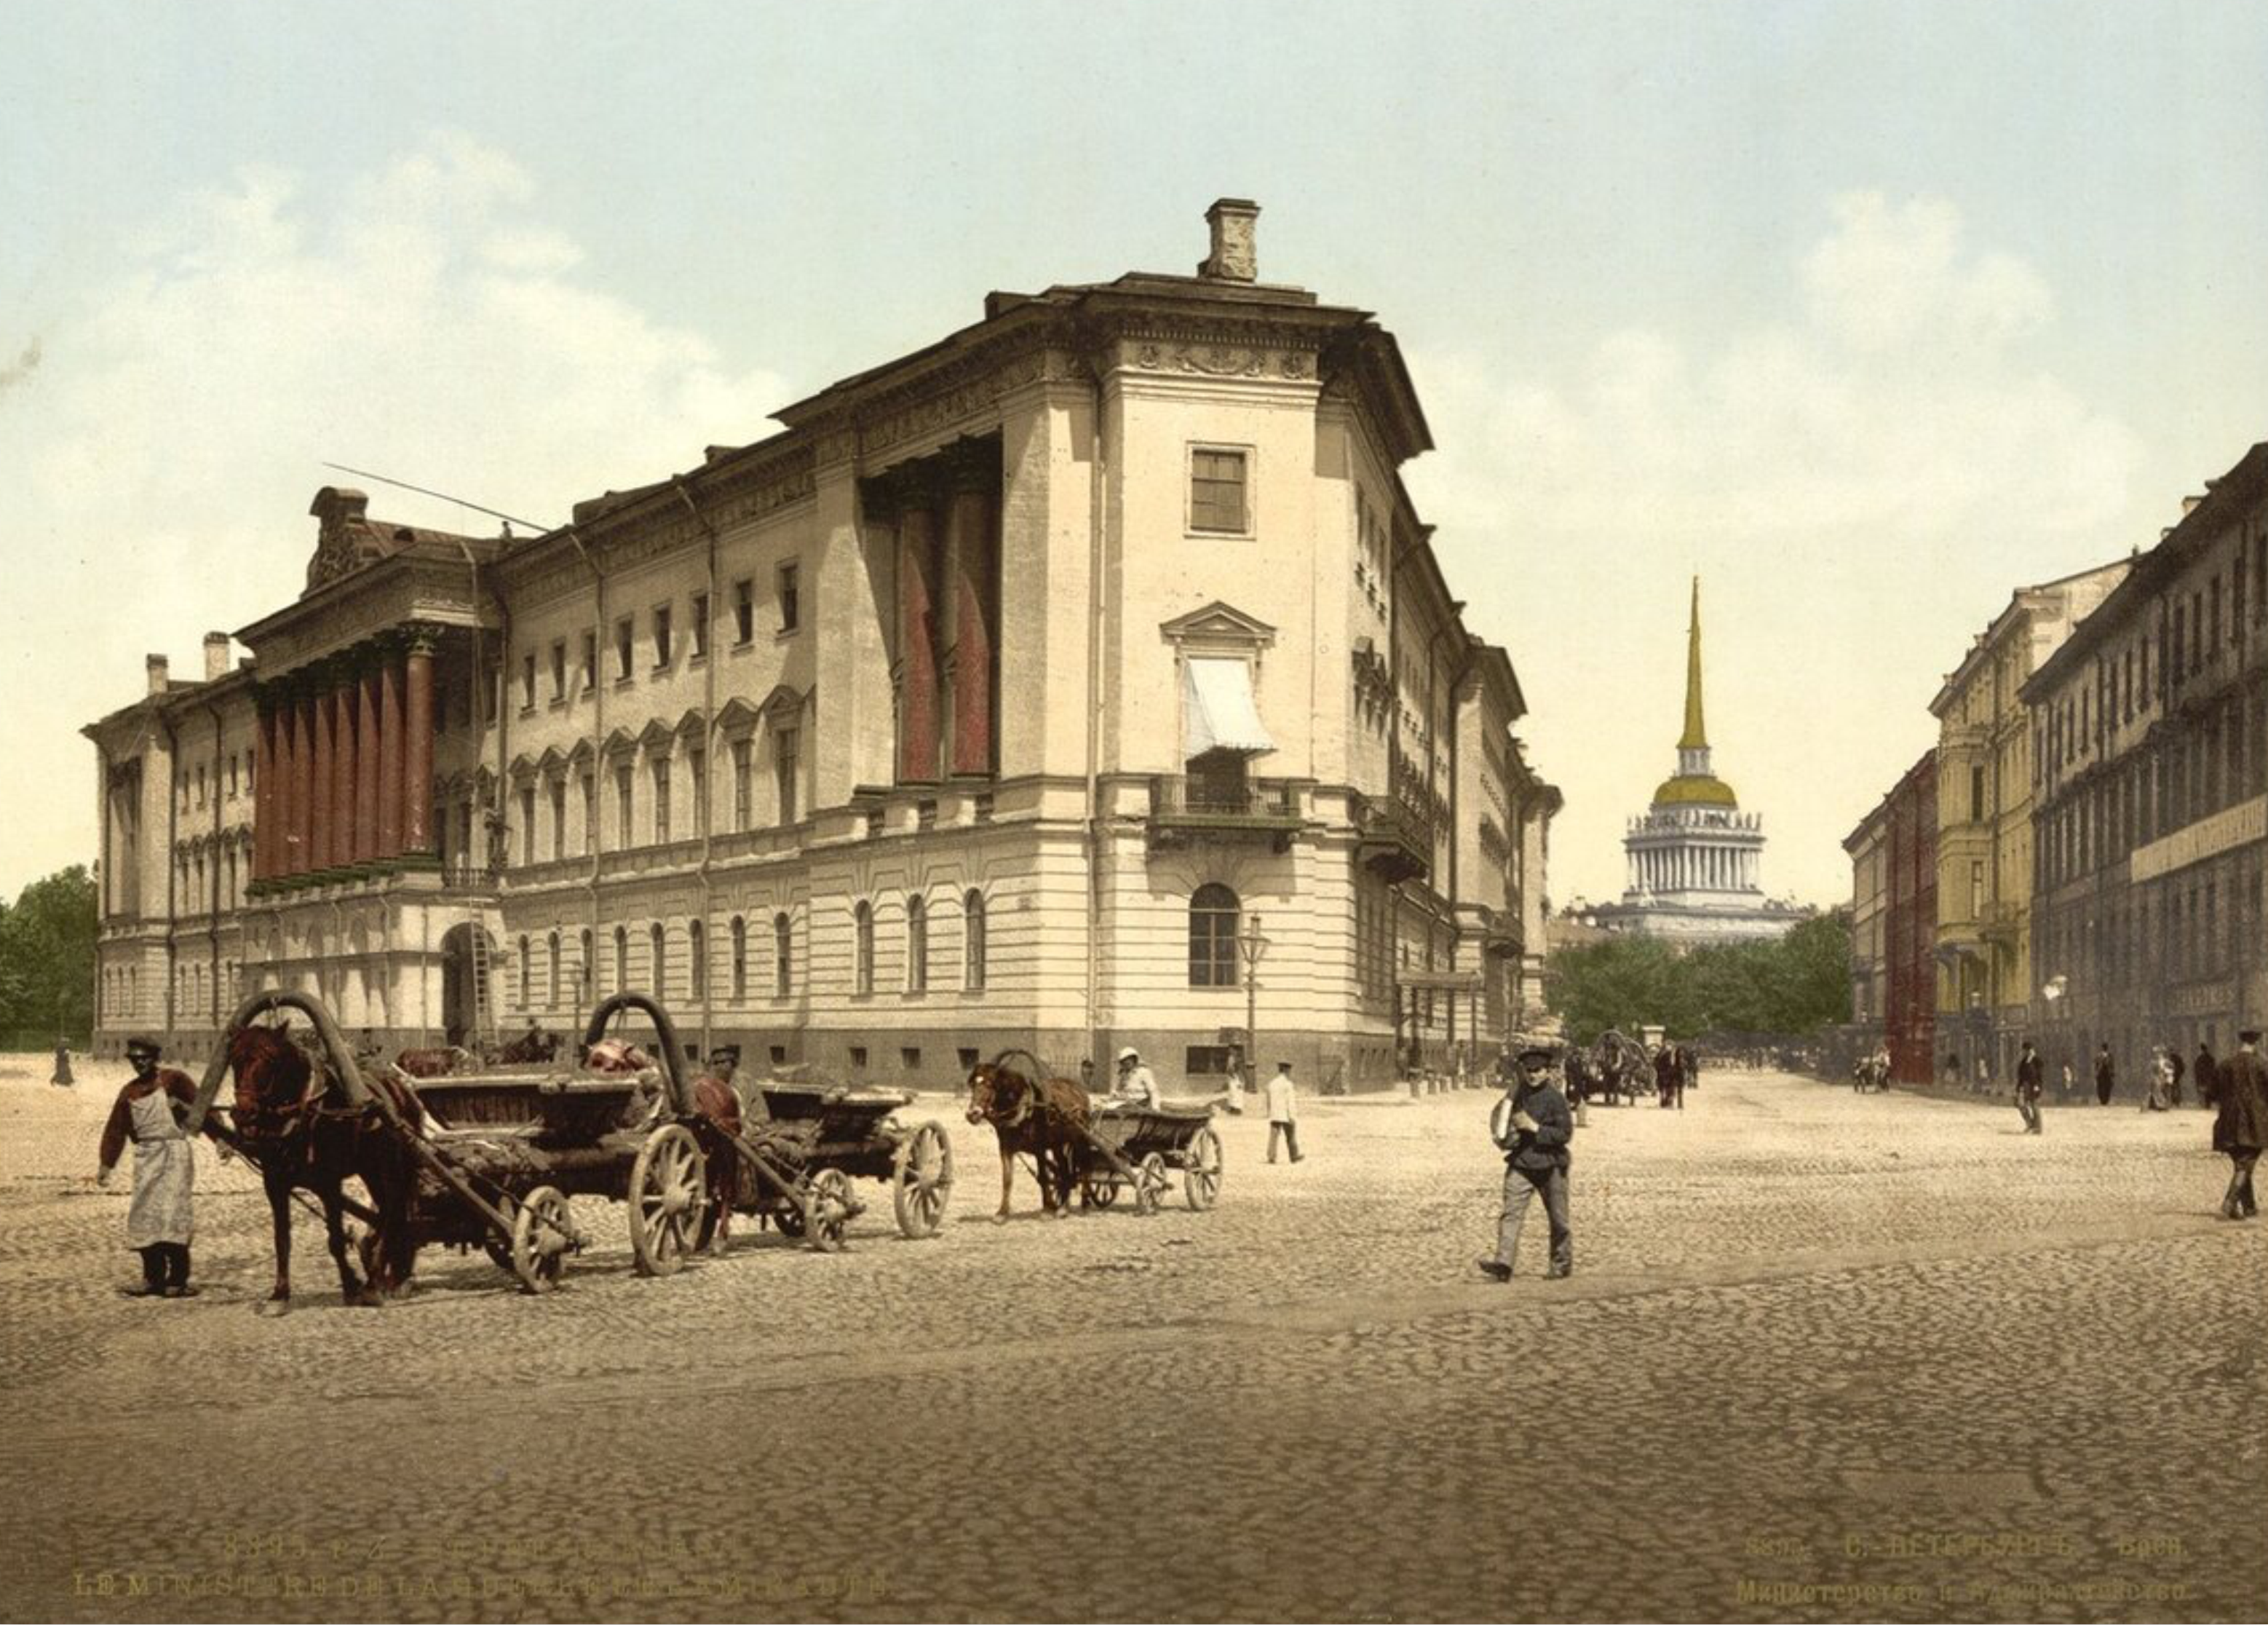 War Offices (late palace of Lobanov-Rostovsky) and Admiralty on Voznesensky Prospect in Saint Petersburg. Russian Empire, between 1890 and 1905 - Photochrom photo.png